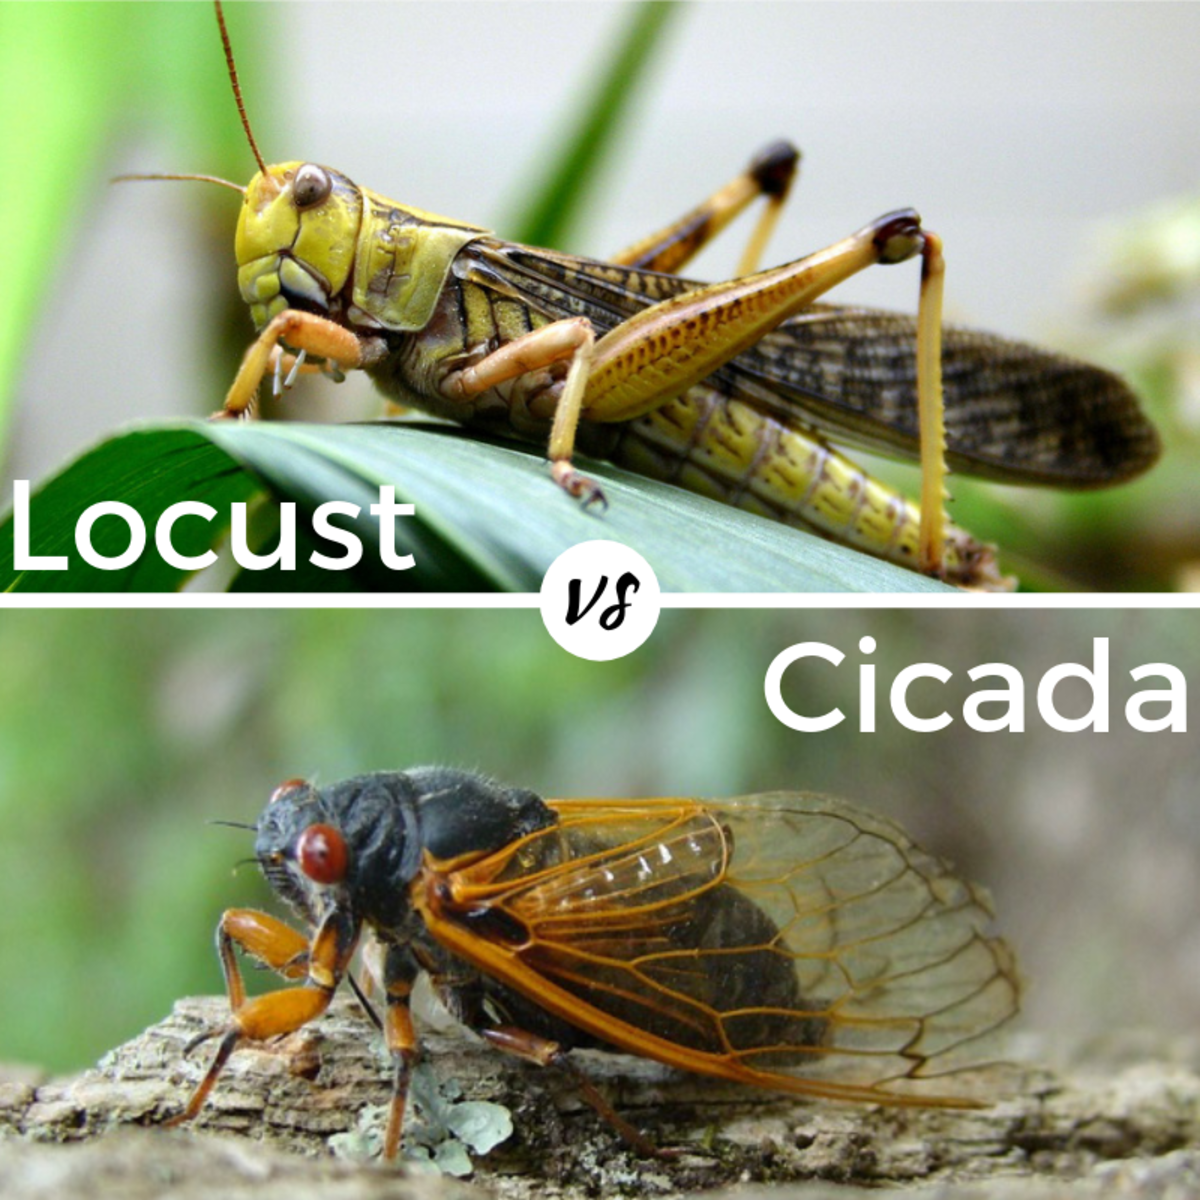 Collection 98+ Images pictures of locusts and cicadas Sharp